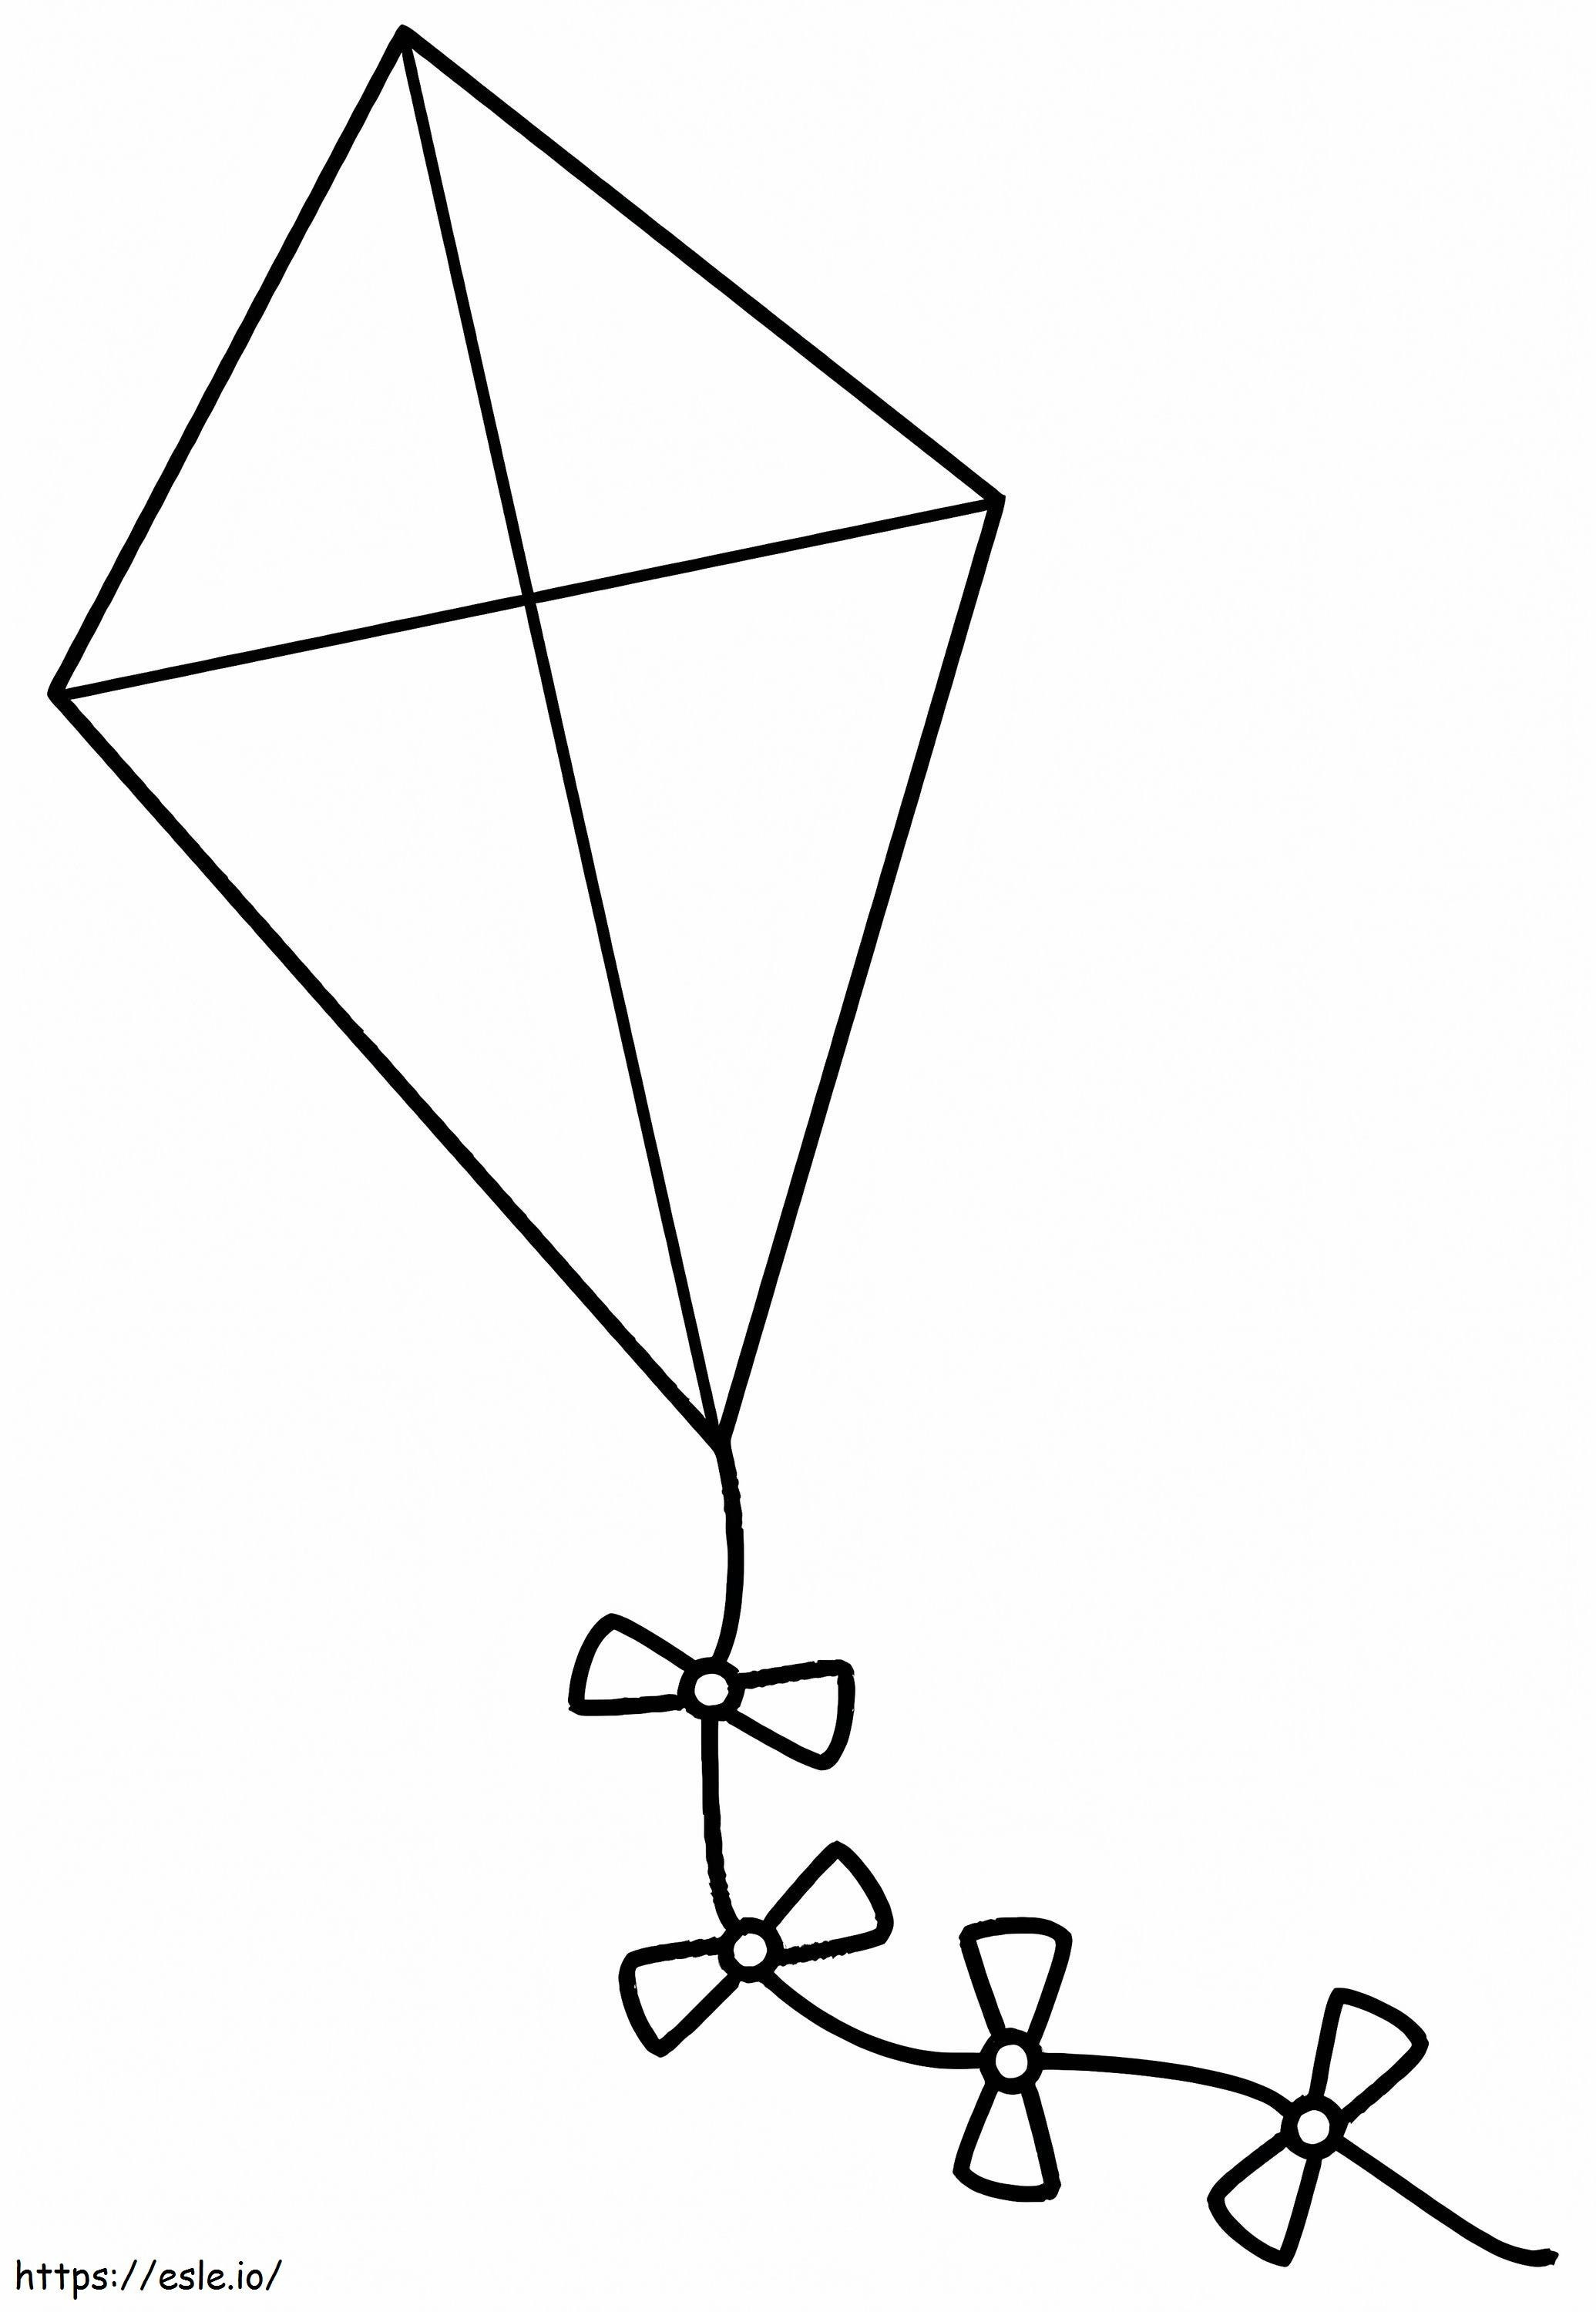 Kite 1 coloring page